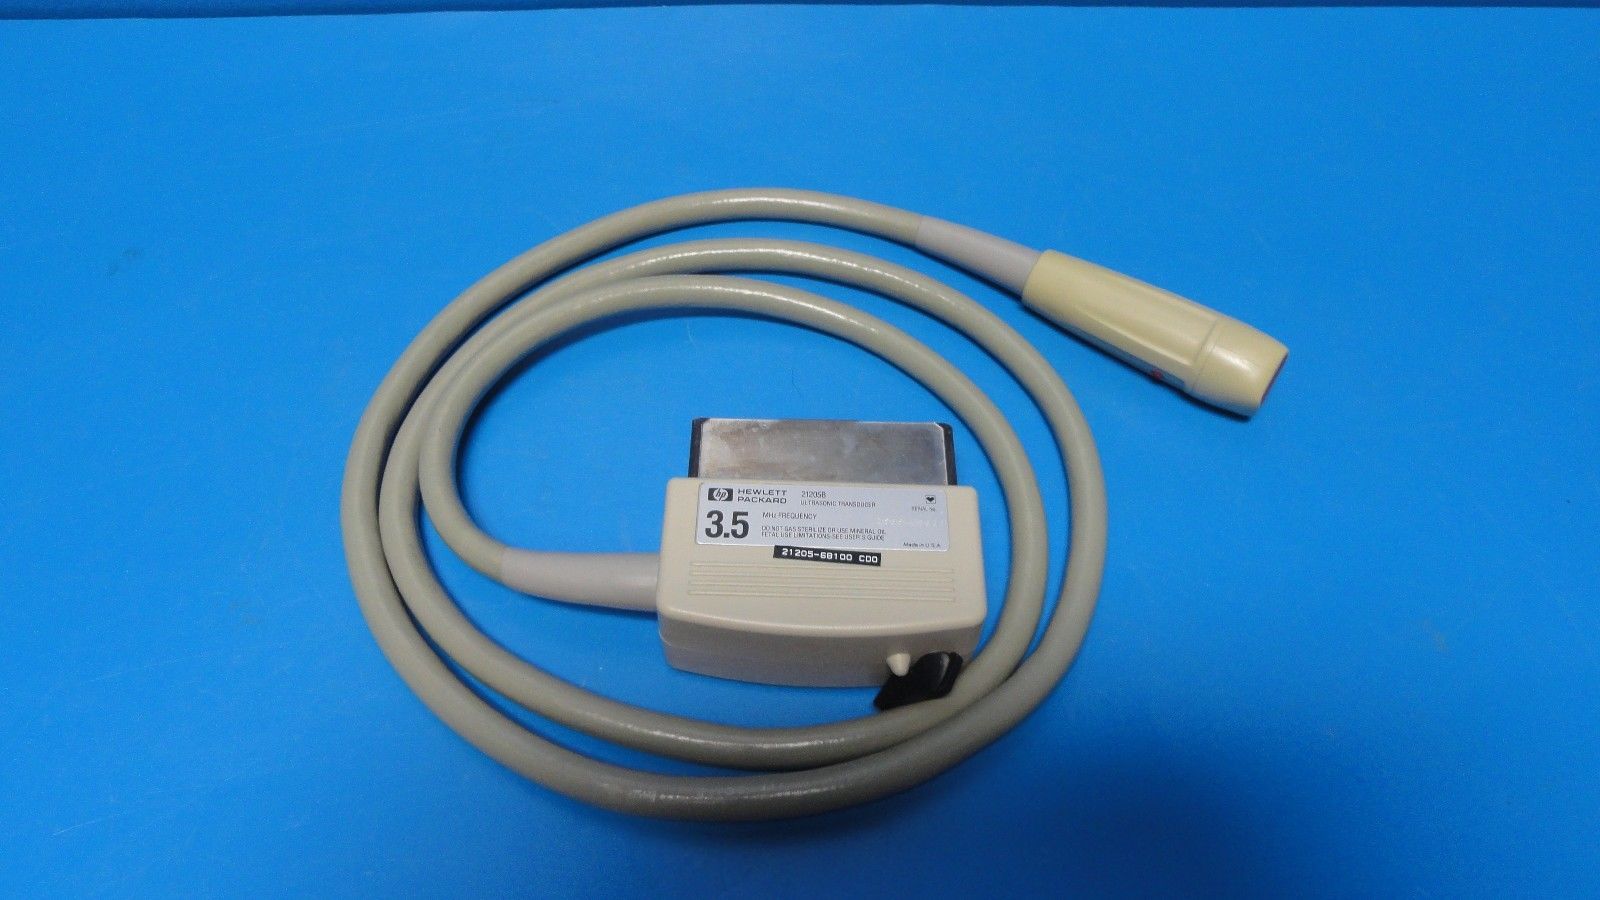 a white cord connected to a white device on a blue surface